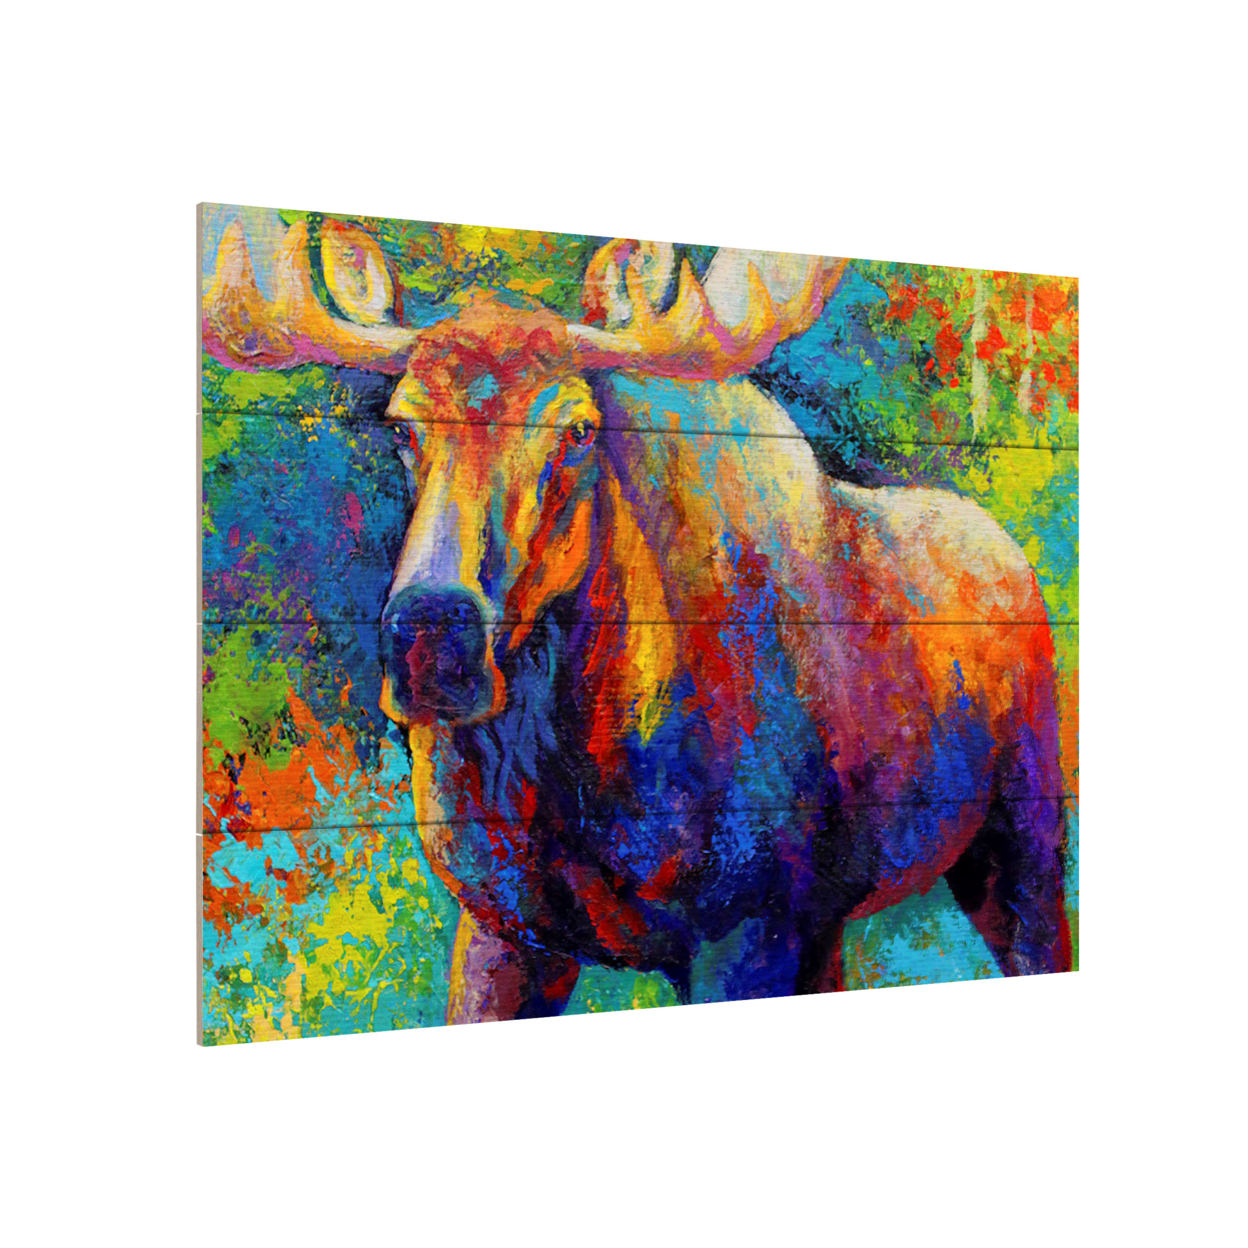 Wall Art 12 X 16 Inches Titled Bull Moose Ready To Hang Printed On Wooden Planks